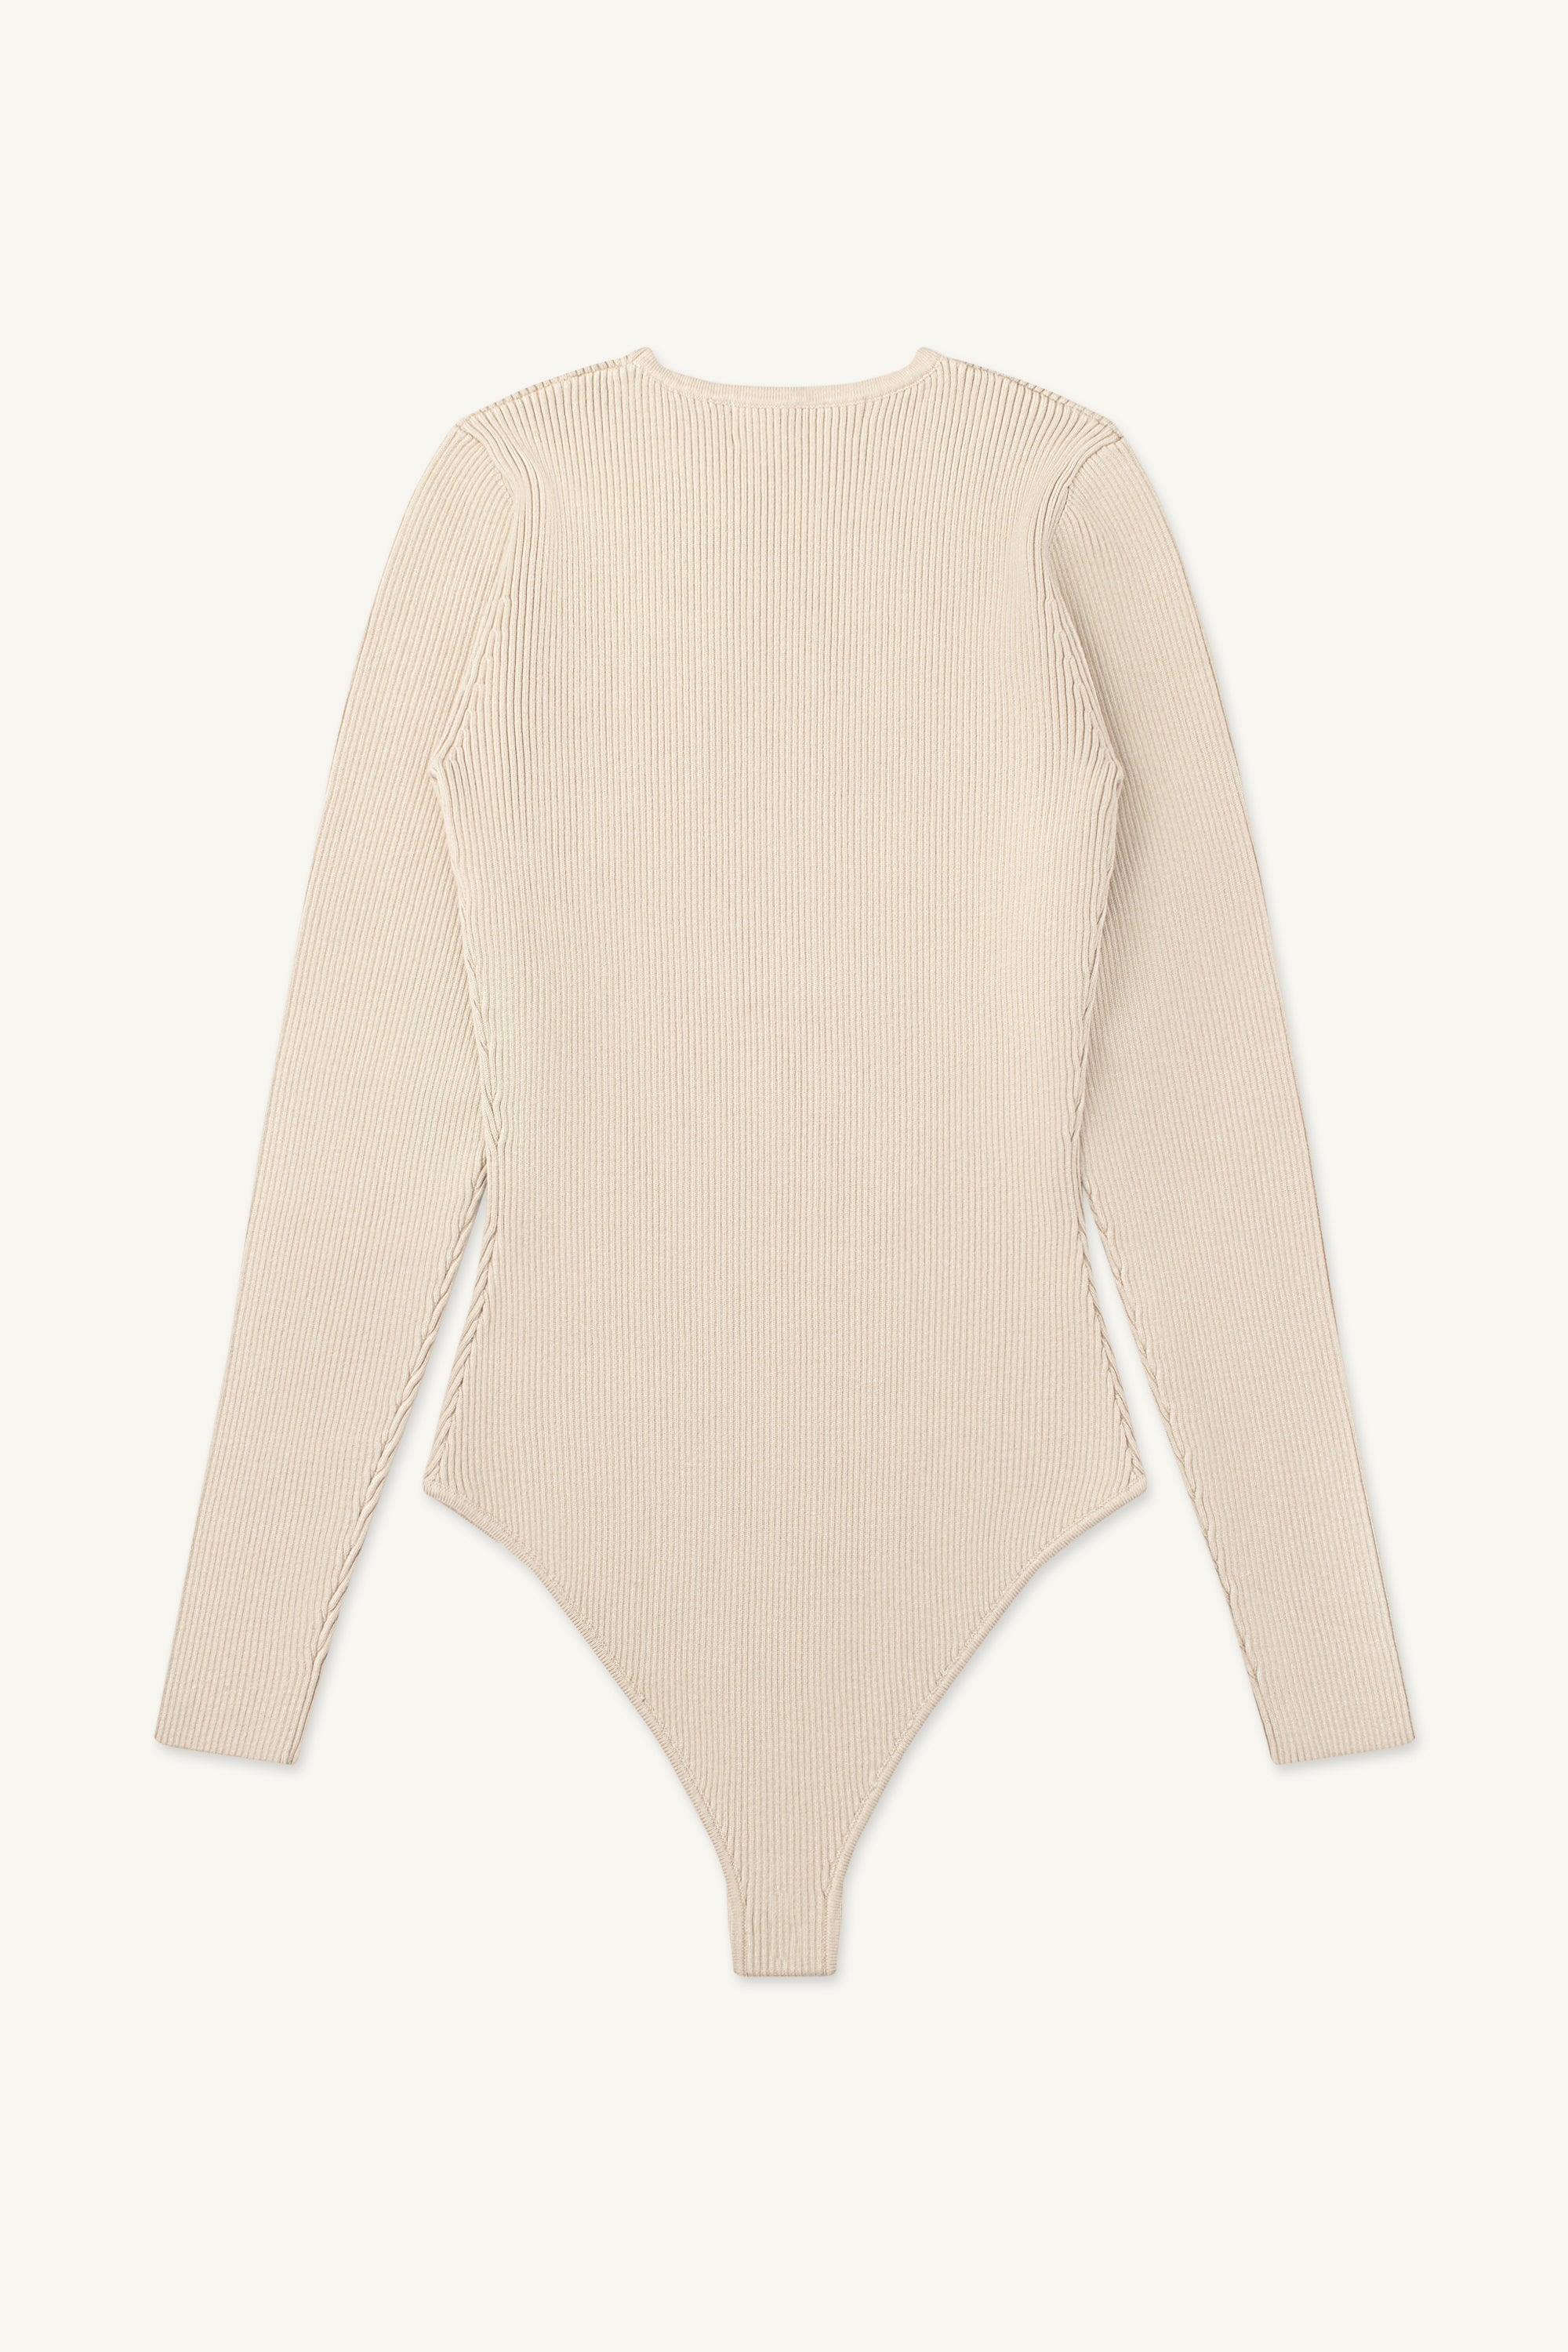 White Rib Knit Bodysuit With Snap Closure V.2 and Brief Cut Bottom